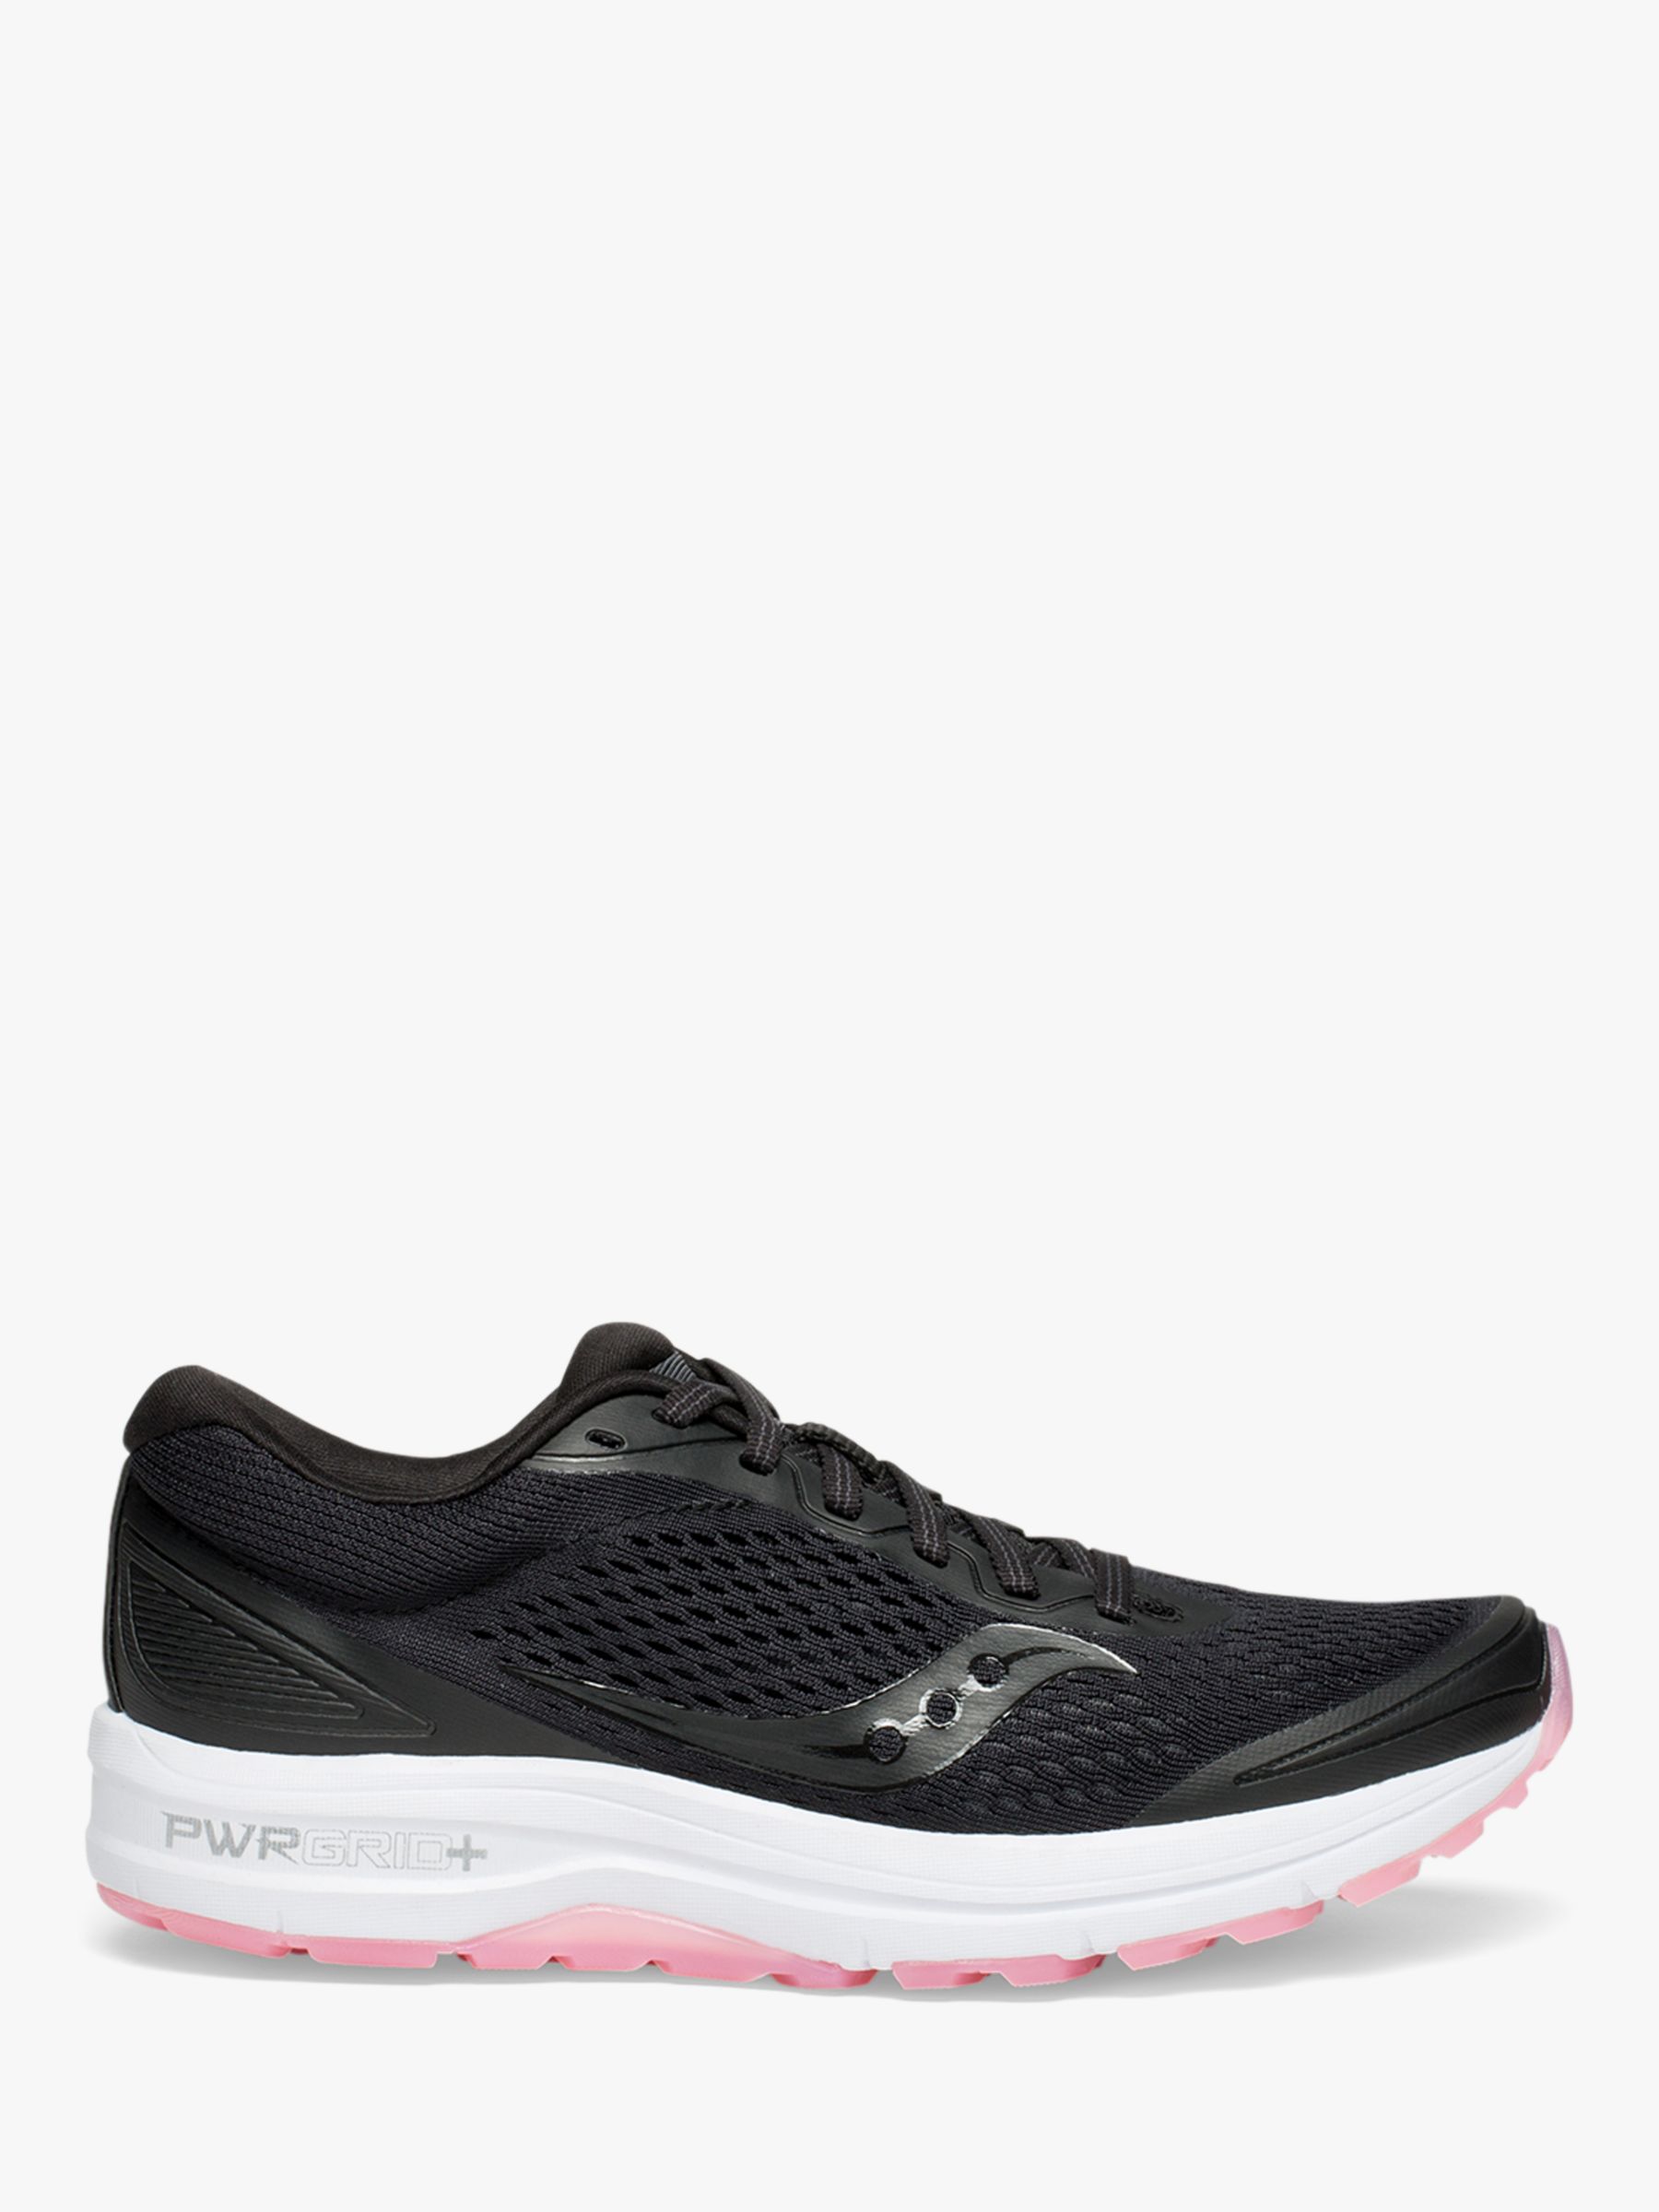 Saucony Clarion Women's Running Shoes, Black